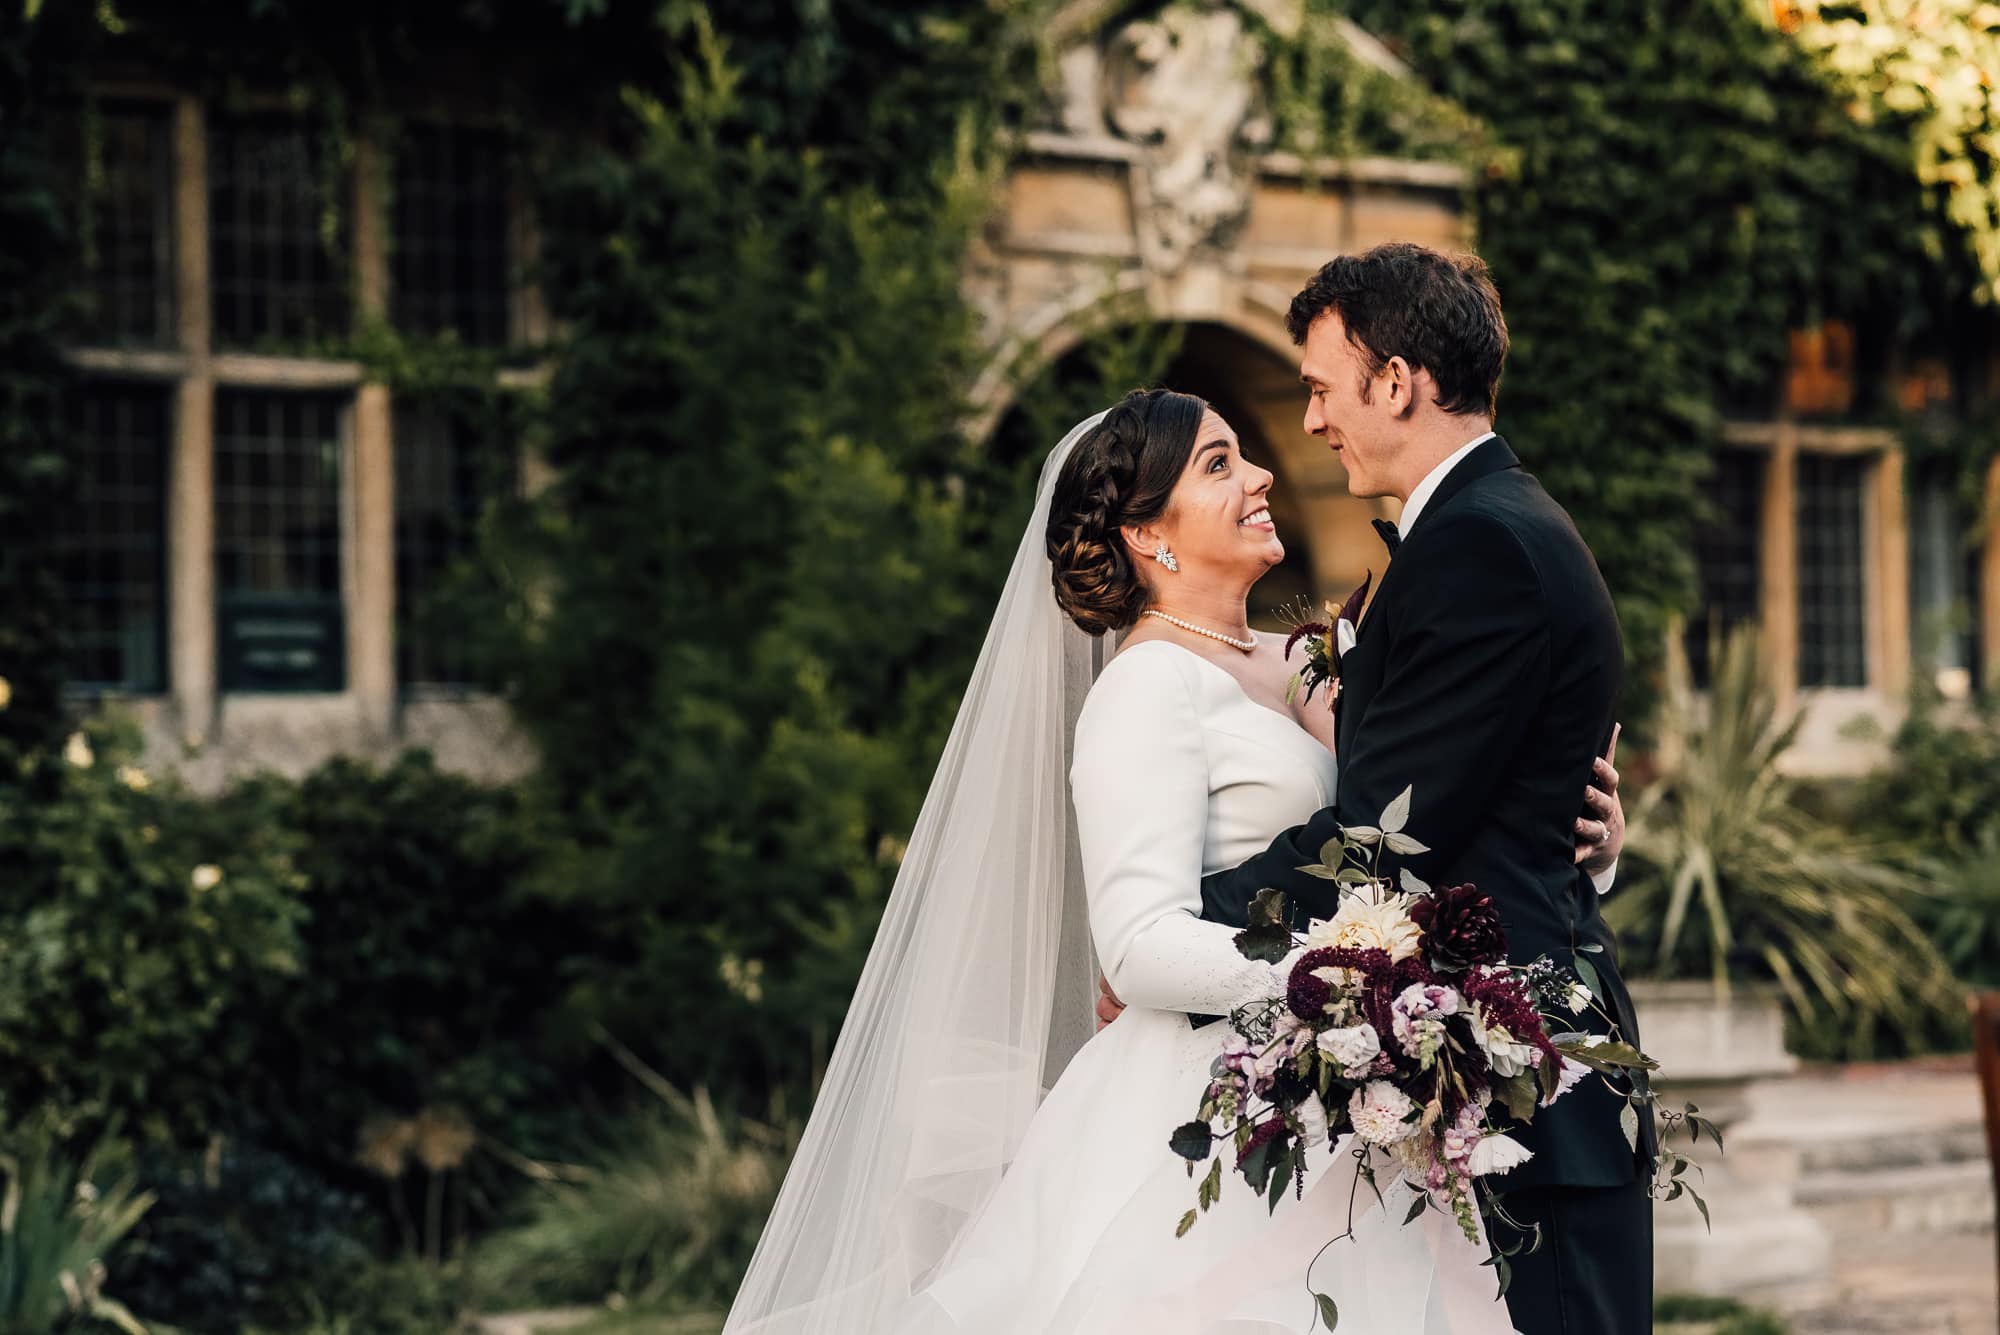 A bride and groom's celebration wedding at Westminster College in Cambridge